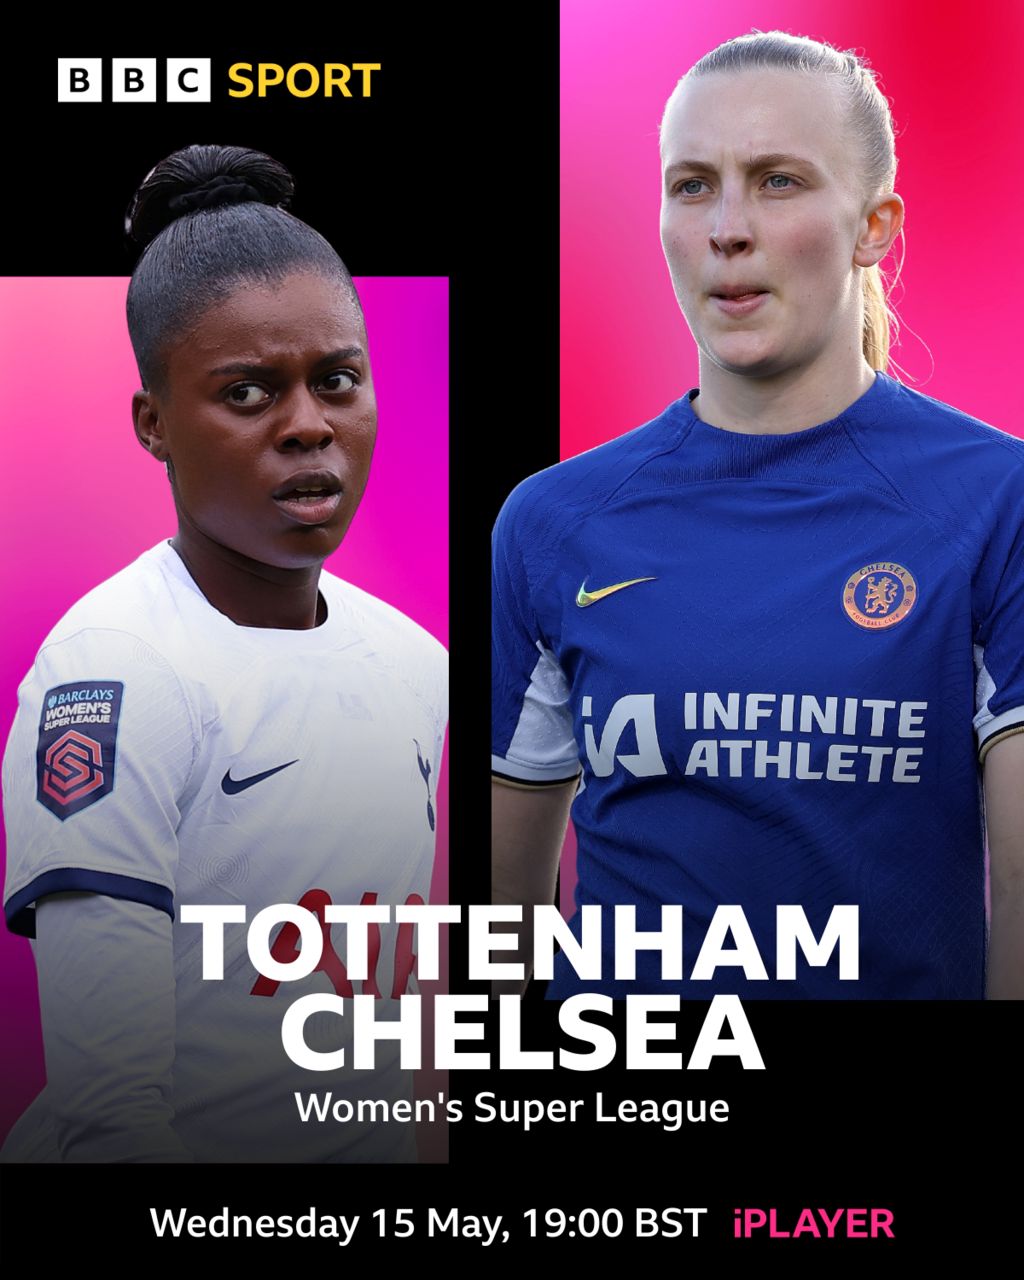 Jessica Naz and Aggie Beever Jones - Tottenham v Chelsea, Women's Super League, Wednesday 15 May, 19:00 BST